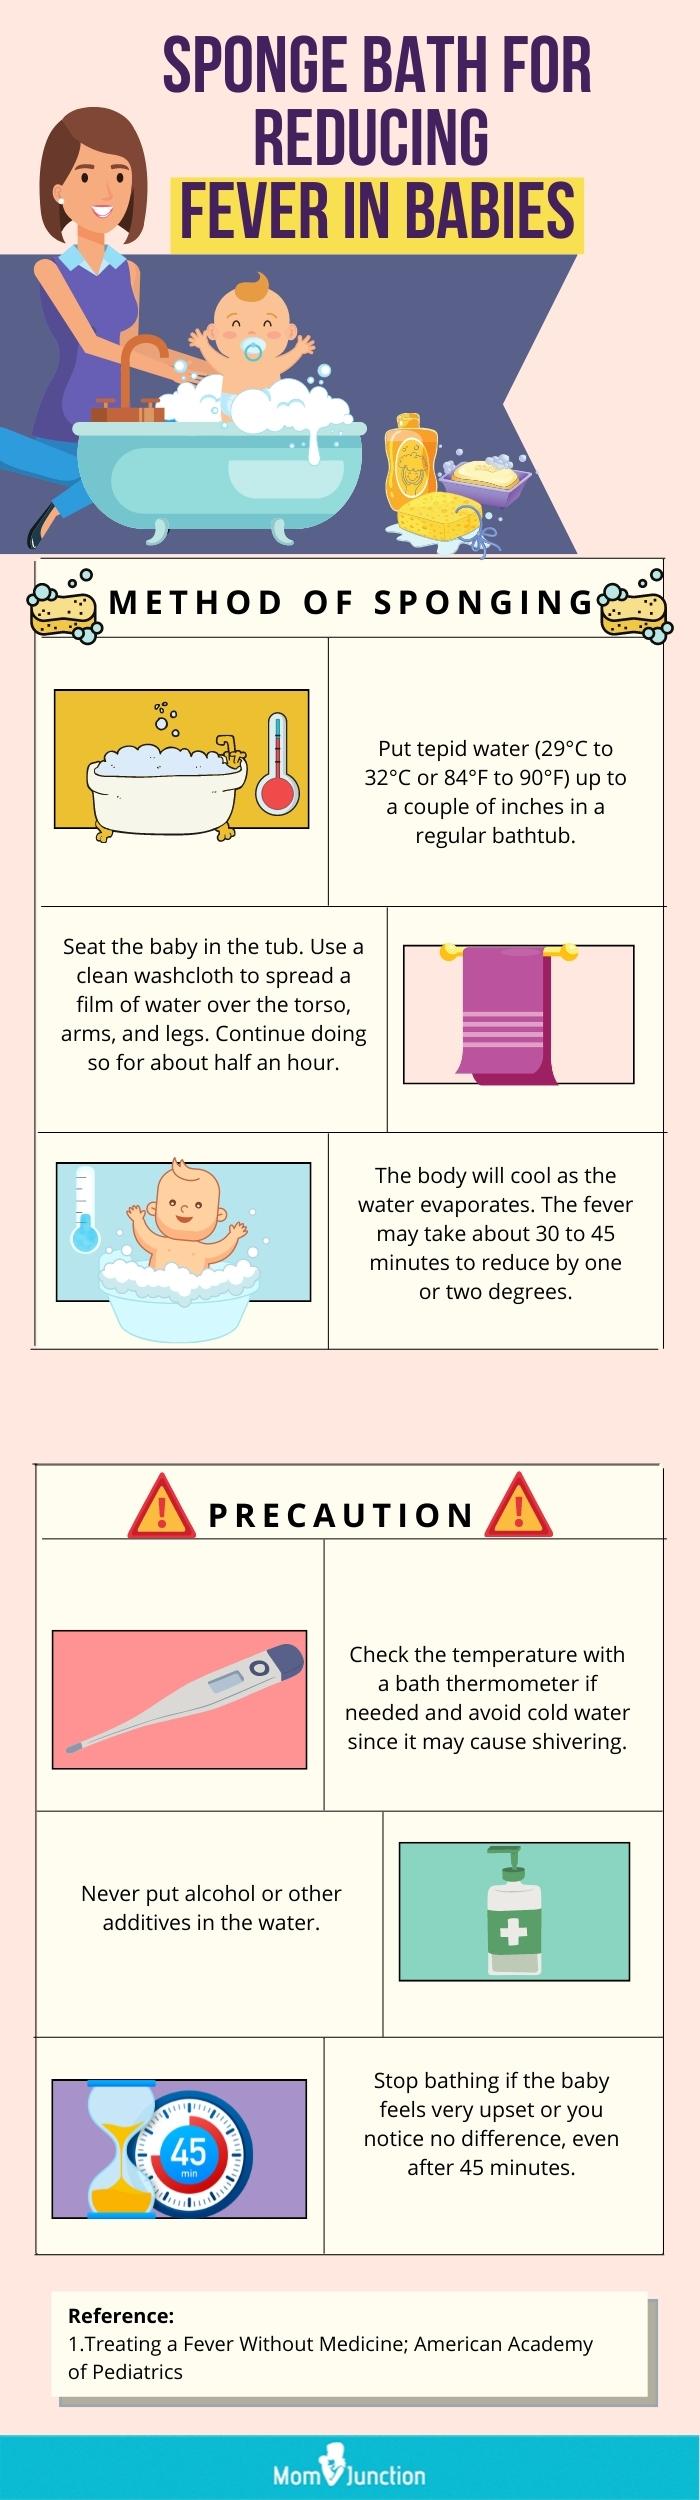 sponge bath for reducing fever in babies [infographic]